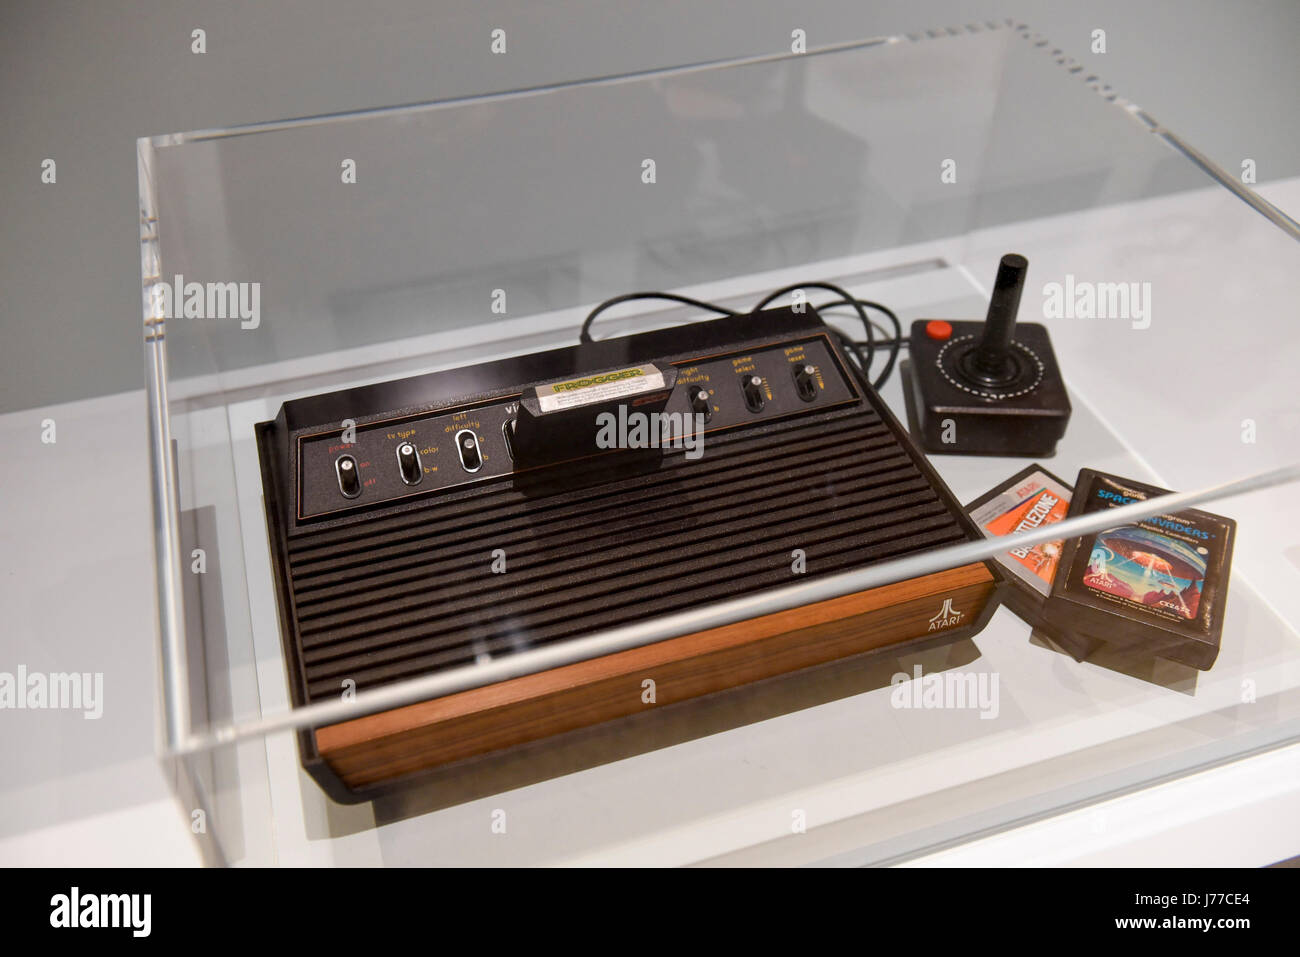 London, UK. 23rd May, 2017. An Atari 2600 CX2600-A, a video console designed by Ted Dabney and Nolan Bushnell, 1980, deemed to be the godfather of home video systems. Press preview of 'California Designing Freedom', an exhibition at the Design Museum celebrating the history of products designed in California from the 1960s to the current day. The exhibition runs from 24 May to 15 October 2017. Credit: Stephen Chung/Alamy Live News Stock Photo